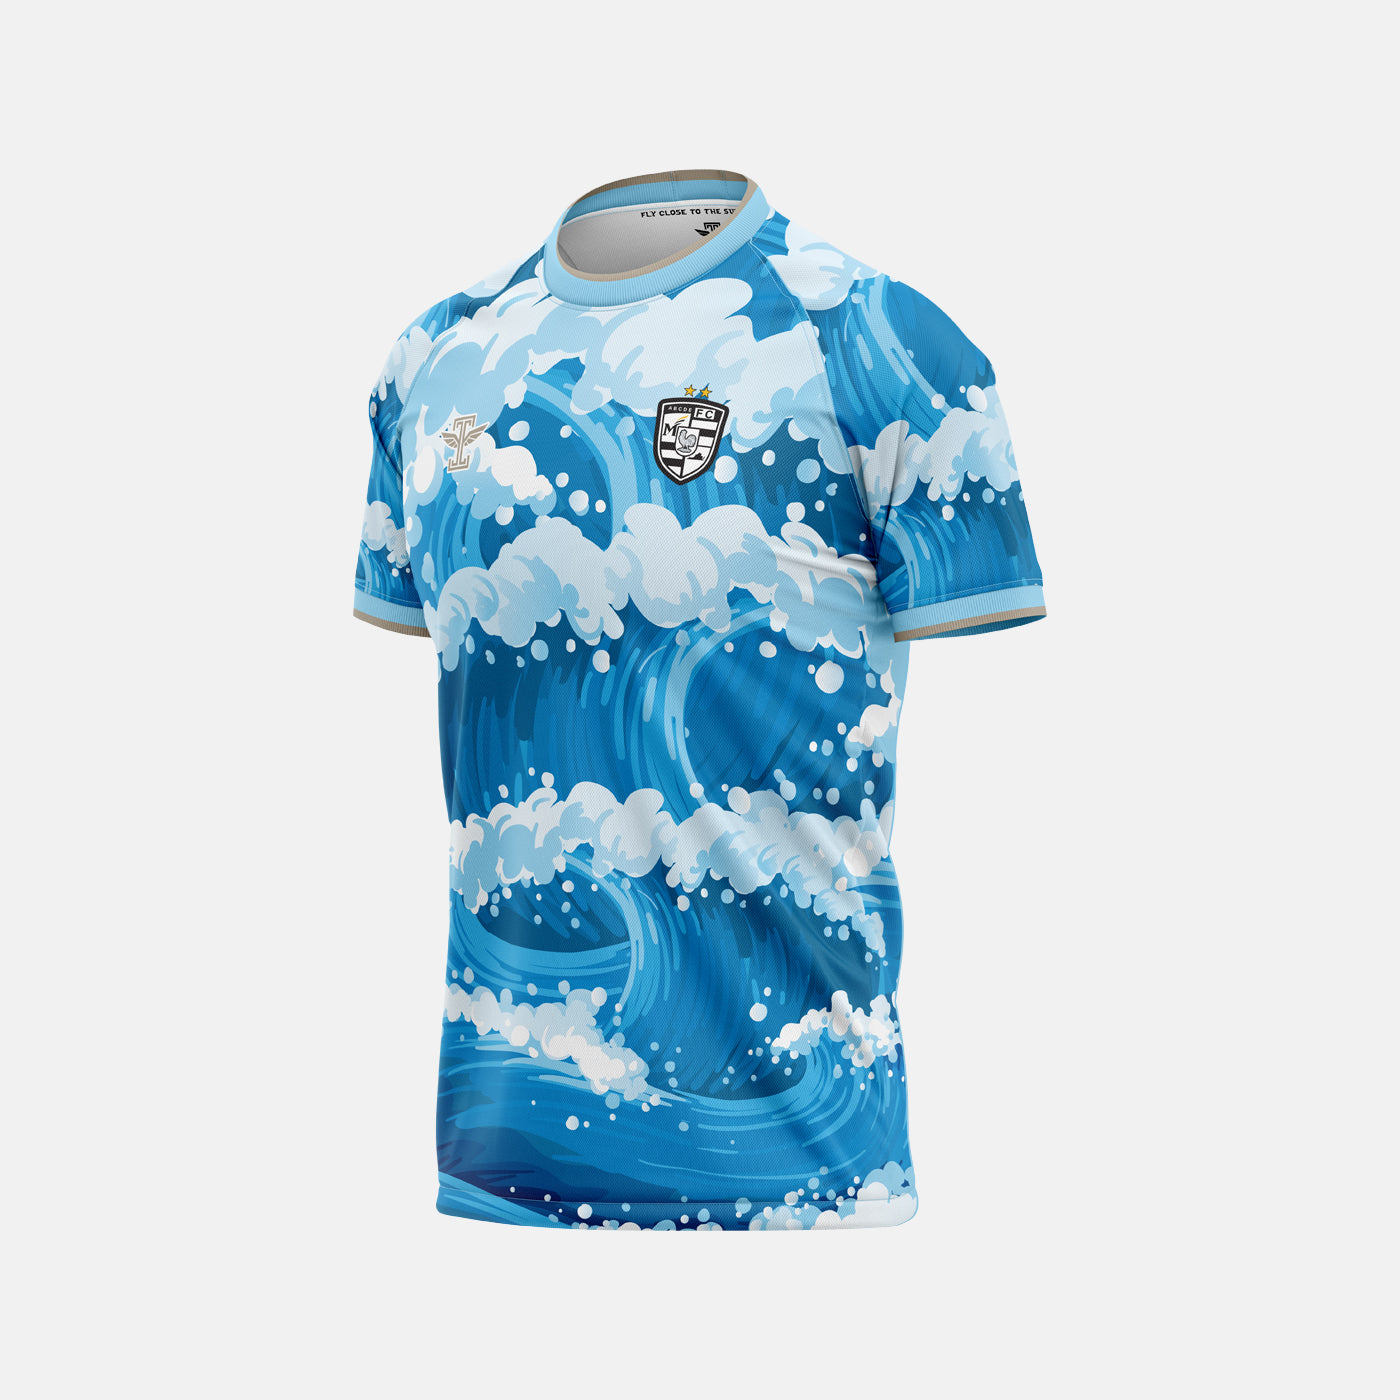 ABCDE FC Blue Jersey